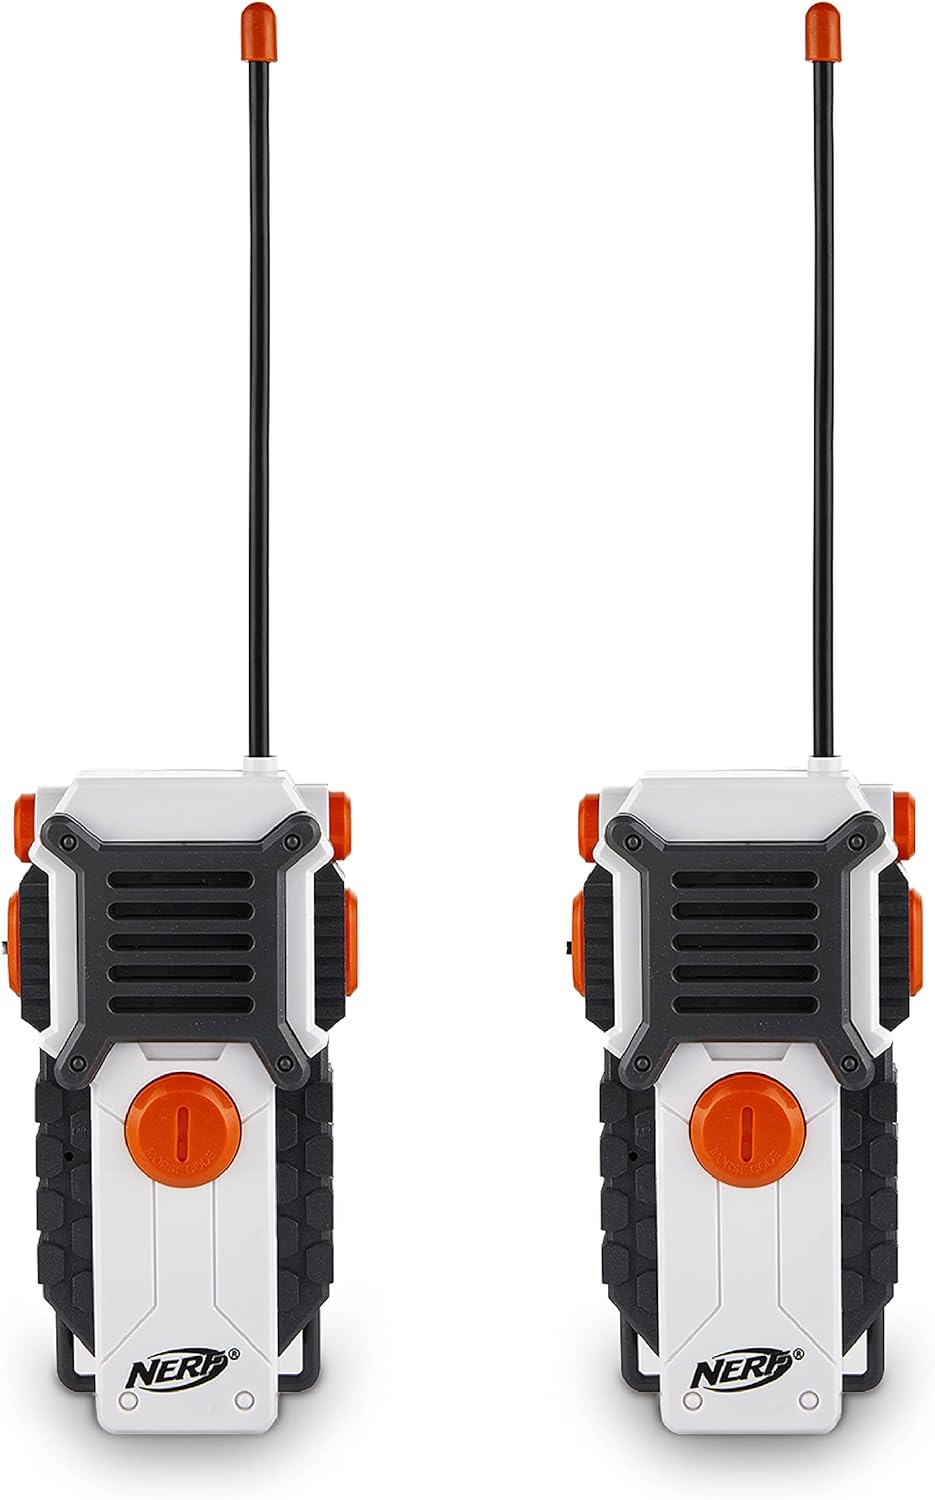 There are two kids' walkie talkies in this set. They have a cute design, a range of 1000 feet, and two-way radio functionality, making them perfect for both boys and girls. The various batteries needed for both walkie talkies must be purchased separately because they are not included with the toys.Even though there are numerous design possibilities, choosing one set can be challenging. These are toys that my children now enjoy just as much as I did when I was their age. Nothing is better than gr